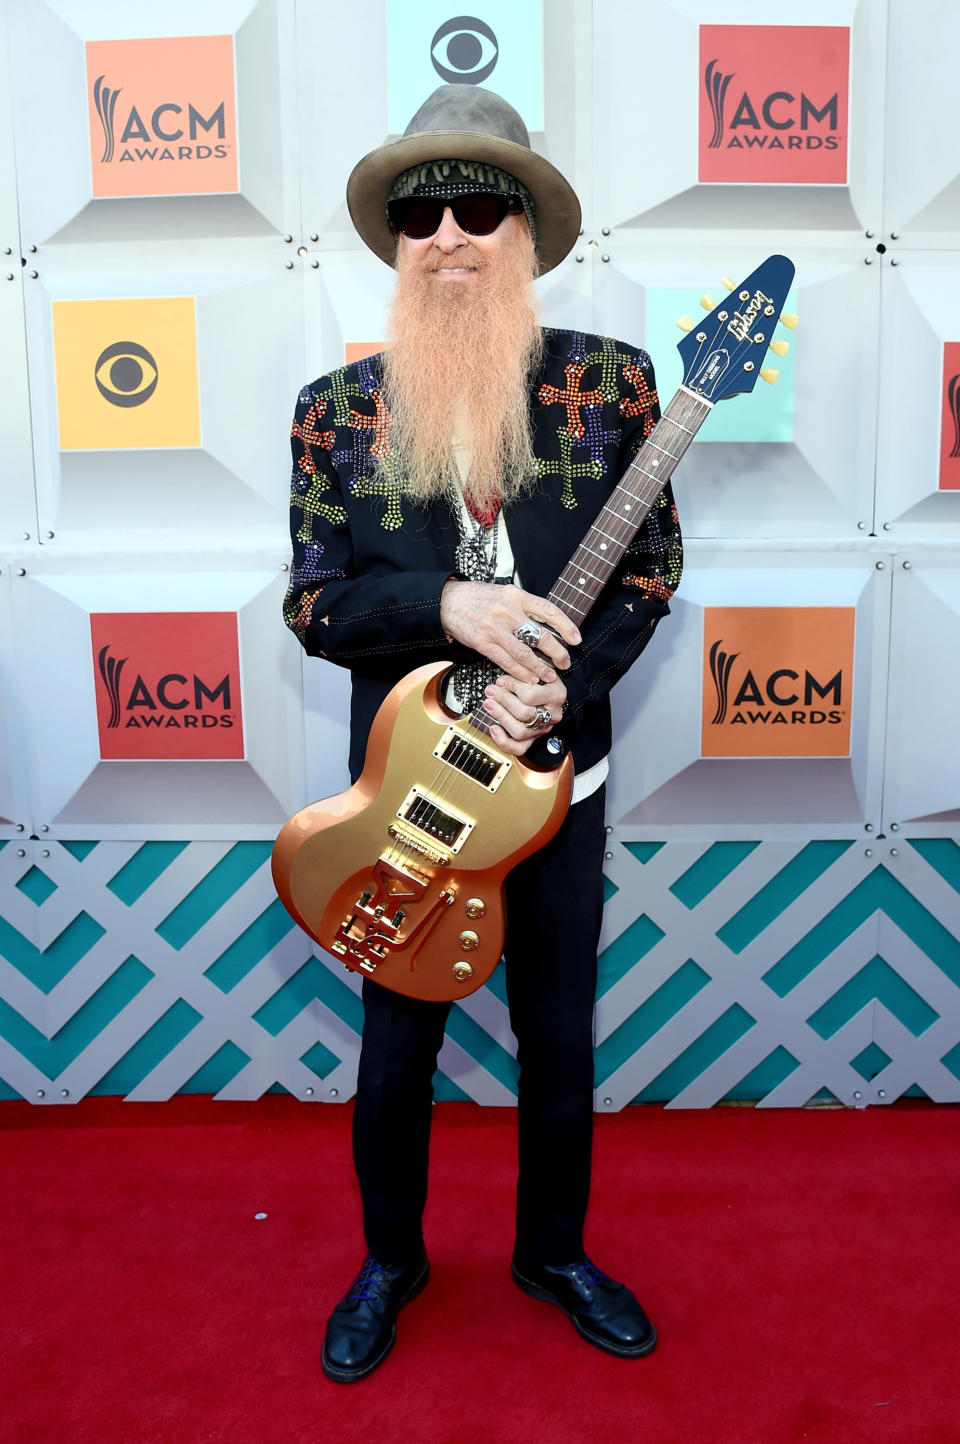 LAS VEGAS, NEVADA - APRIL 03:  Recording artist Billy Gibbons of ZZ Top attends the 51st Academy of Country Music Awards at MGM Grand Garden Arena on April 3, 2016 in Las Vegas, Nevada.  (Photo by Rick Diamond/ACM2016/Getty Images for dcp)